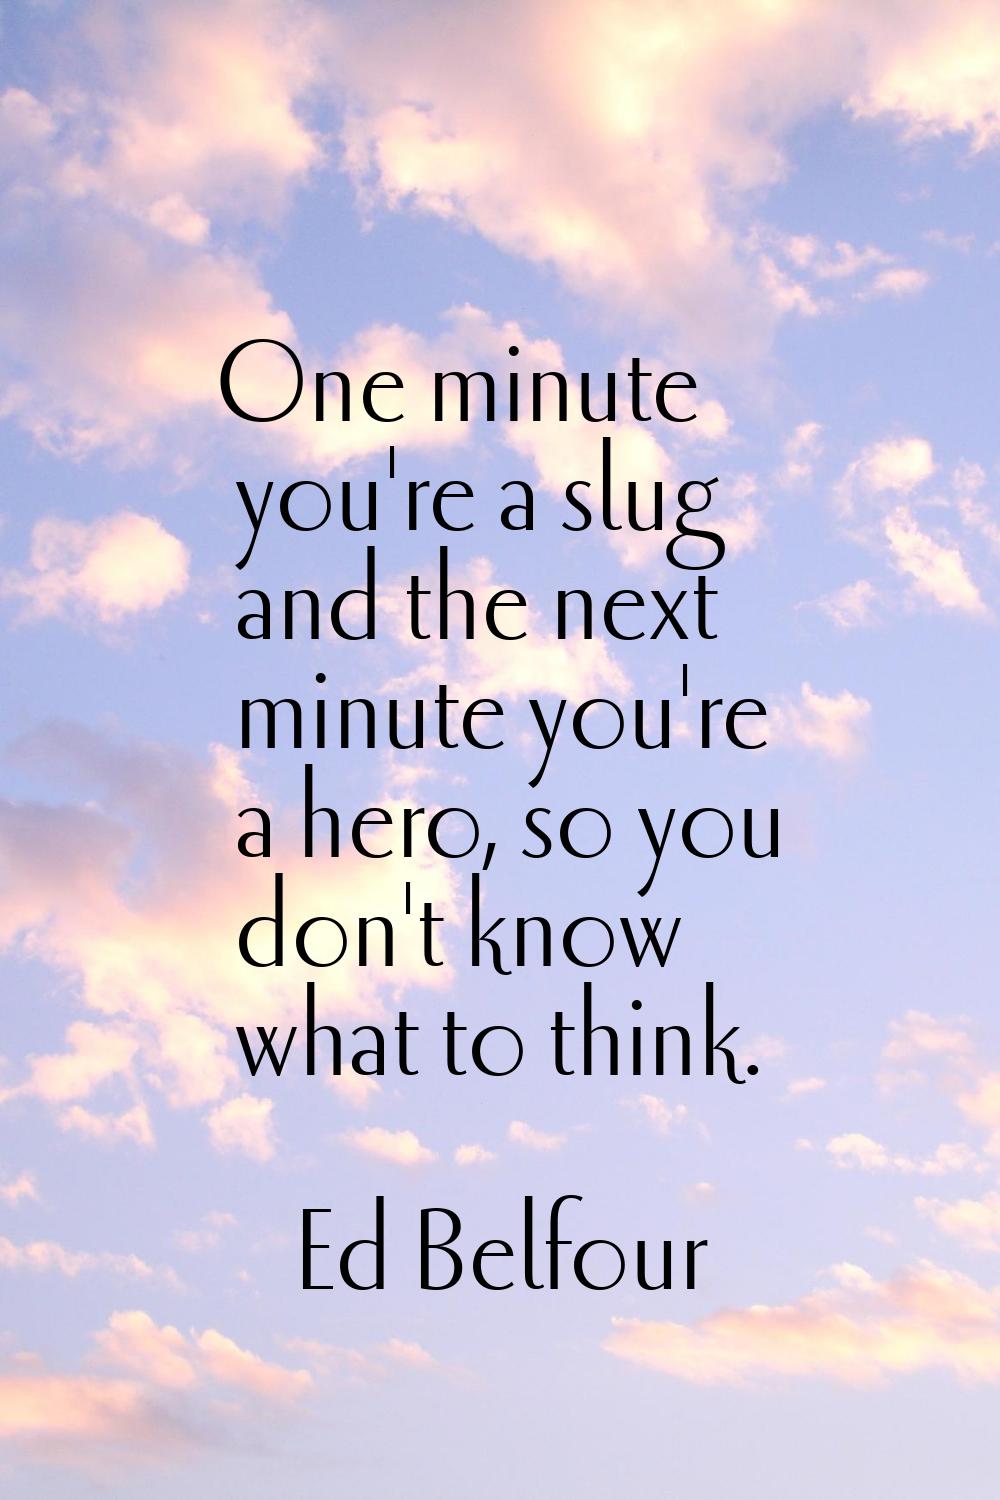 One minute you're a slug and the next minute you're a hero, so you don't know what to think.